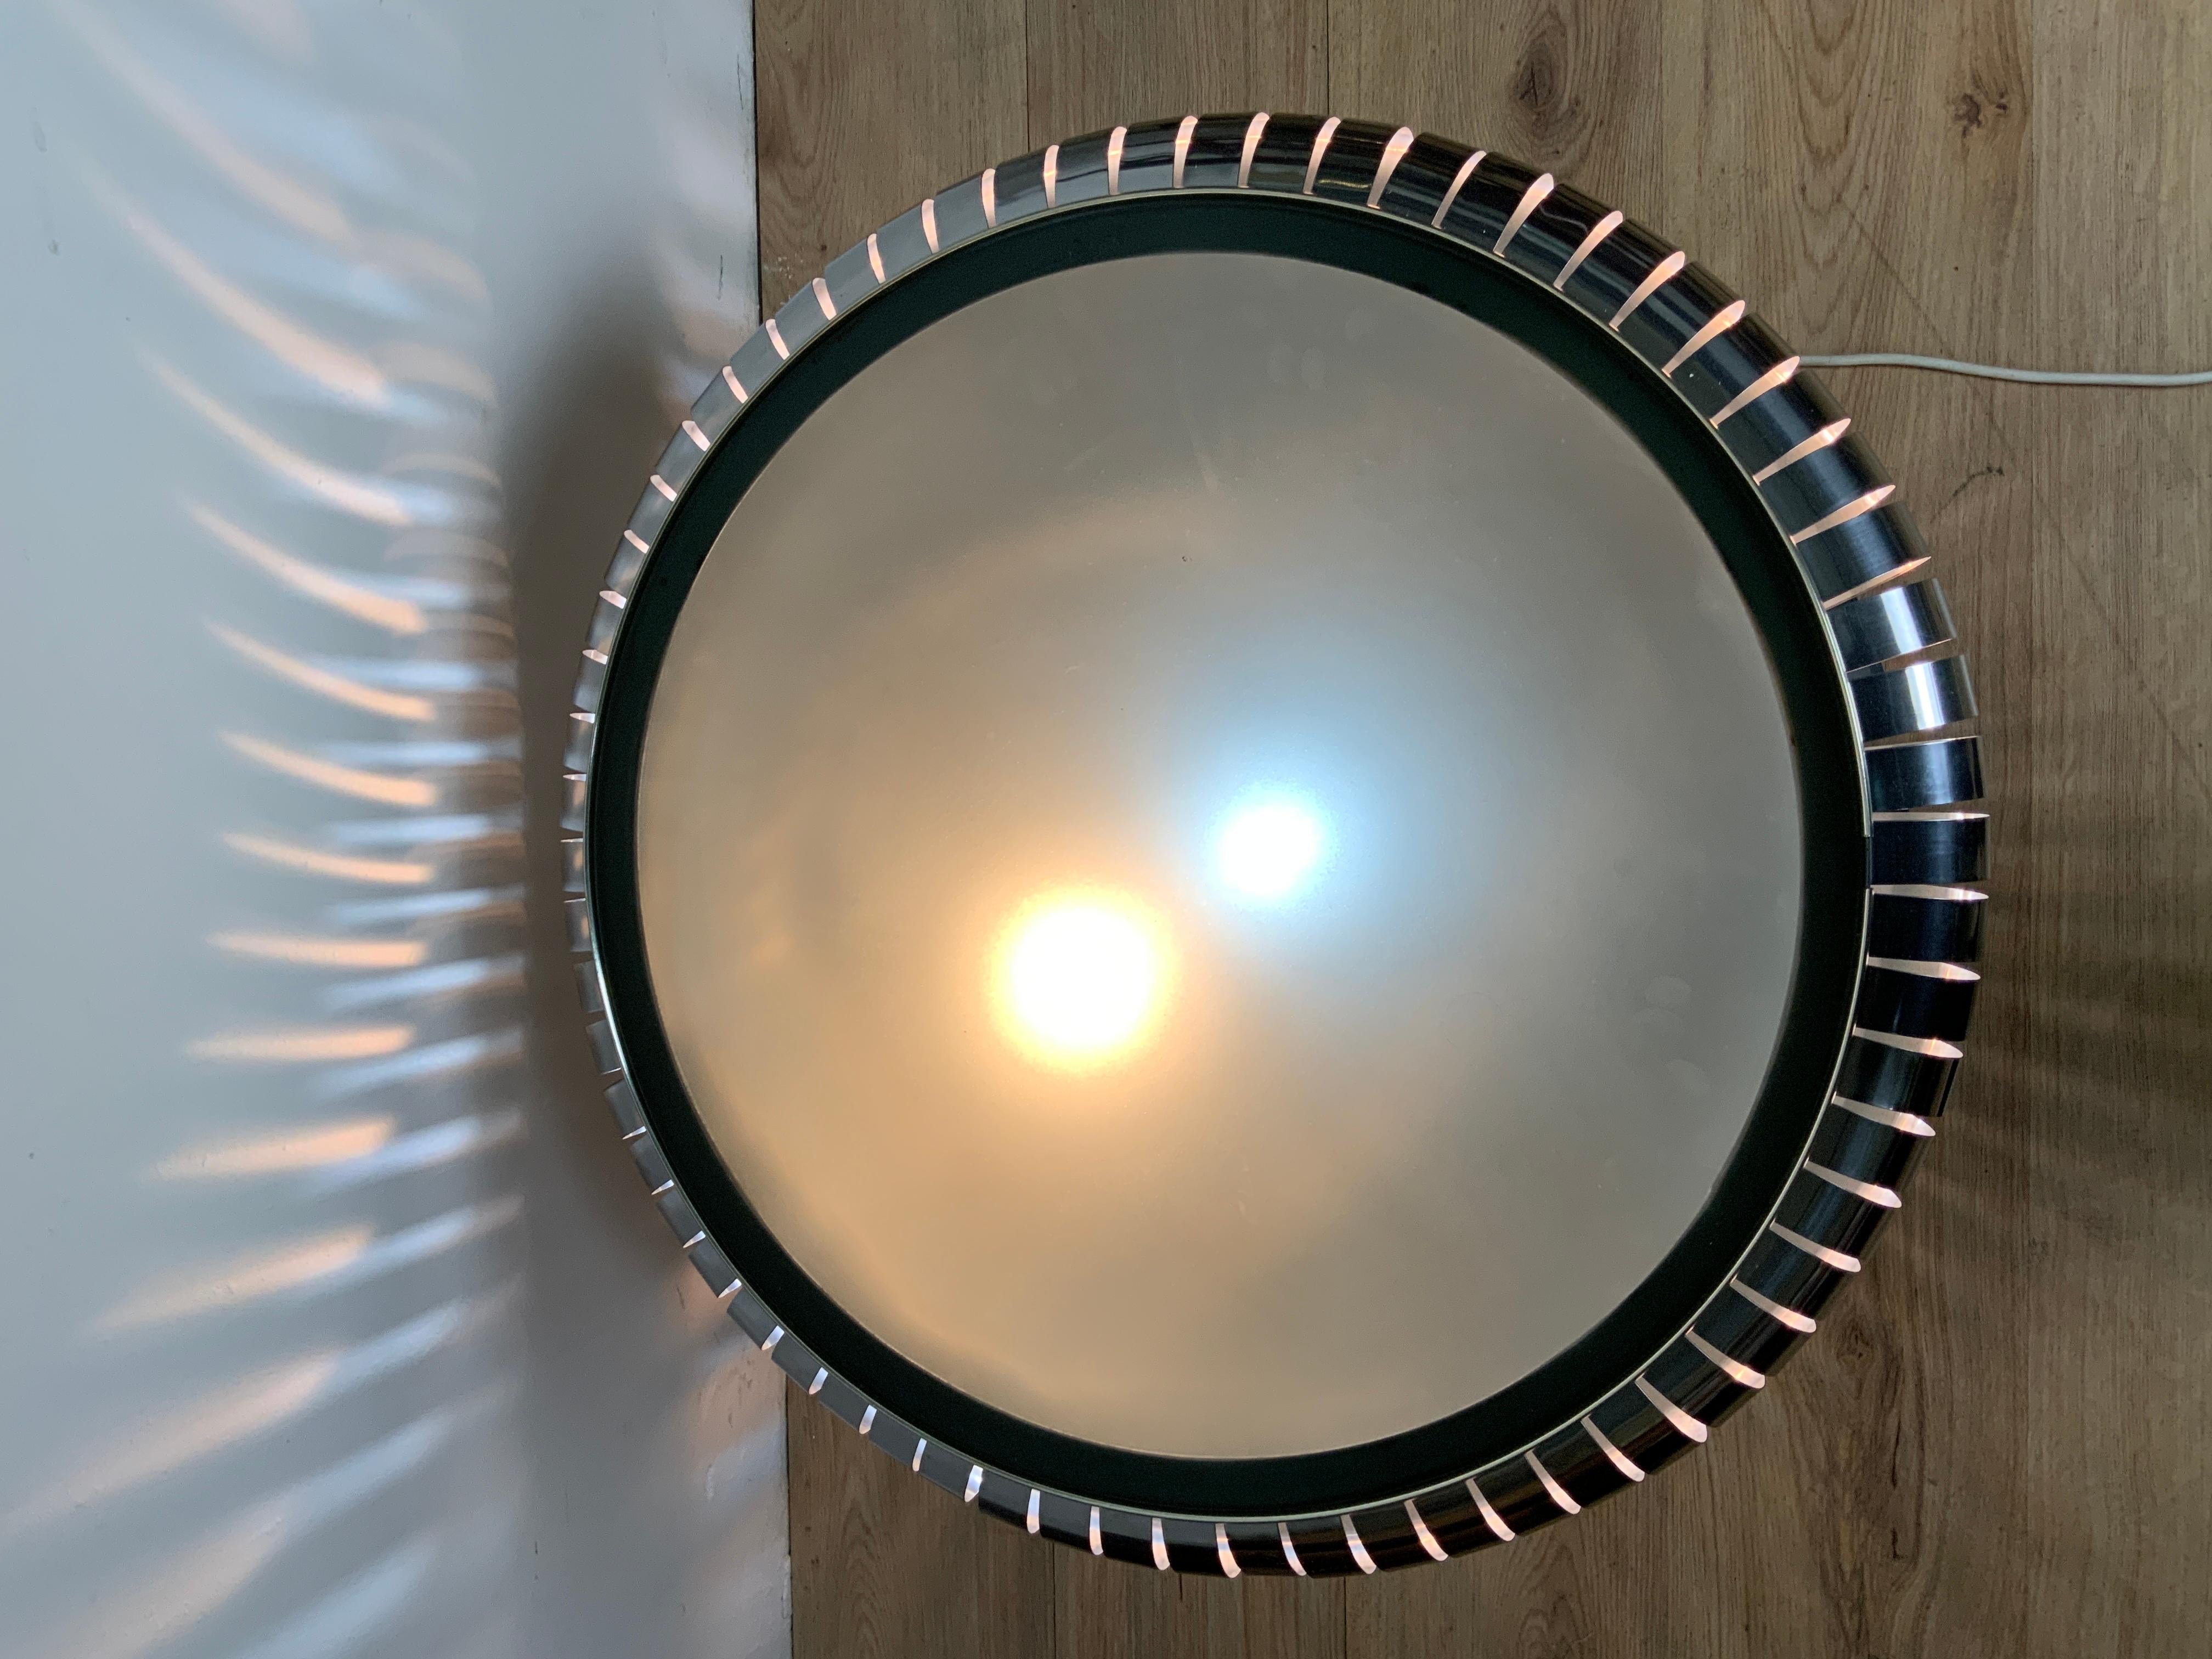 Table lamp 3-light Italian production of the 1970s maximum expression of Space Age.